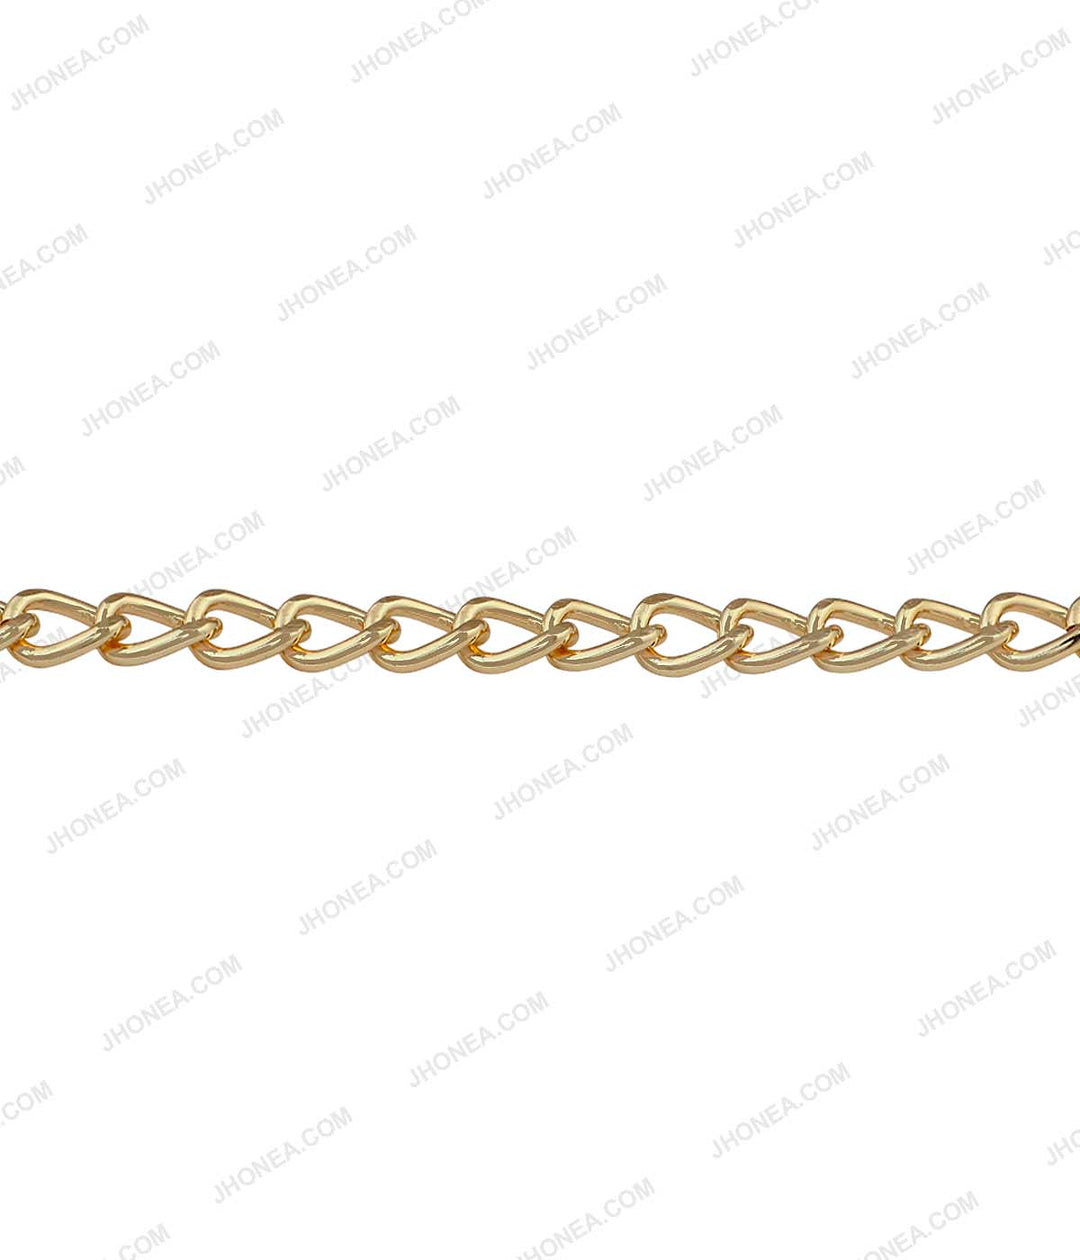 Shiny Gold Fashion Metal Curved Curb Link Chain